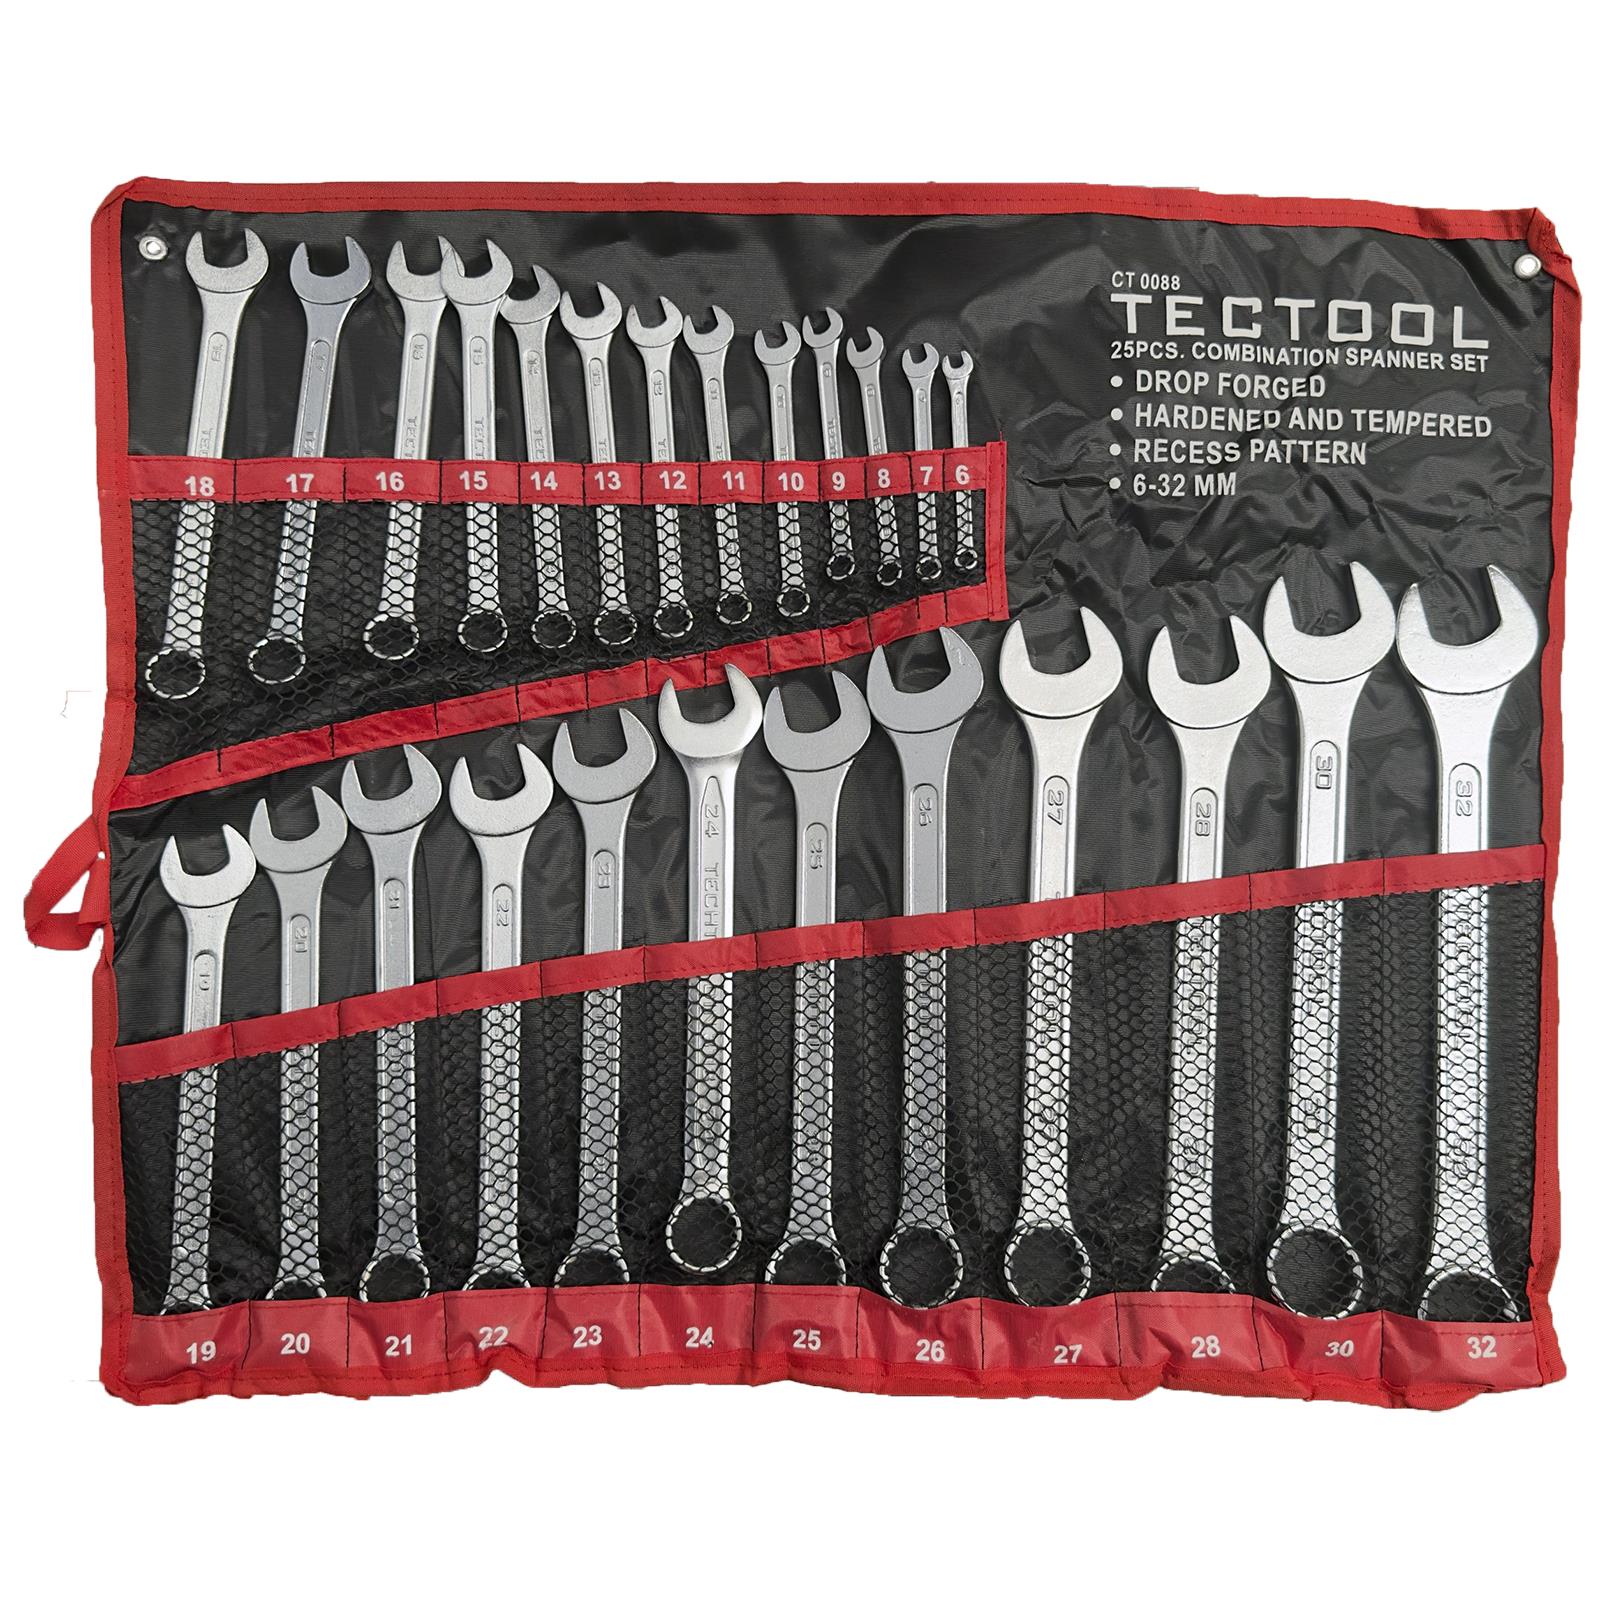 TECTOOL Combination Spanner Set Metric Combo Open End Ring Garage Tool Set 25pc